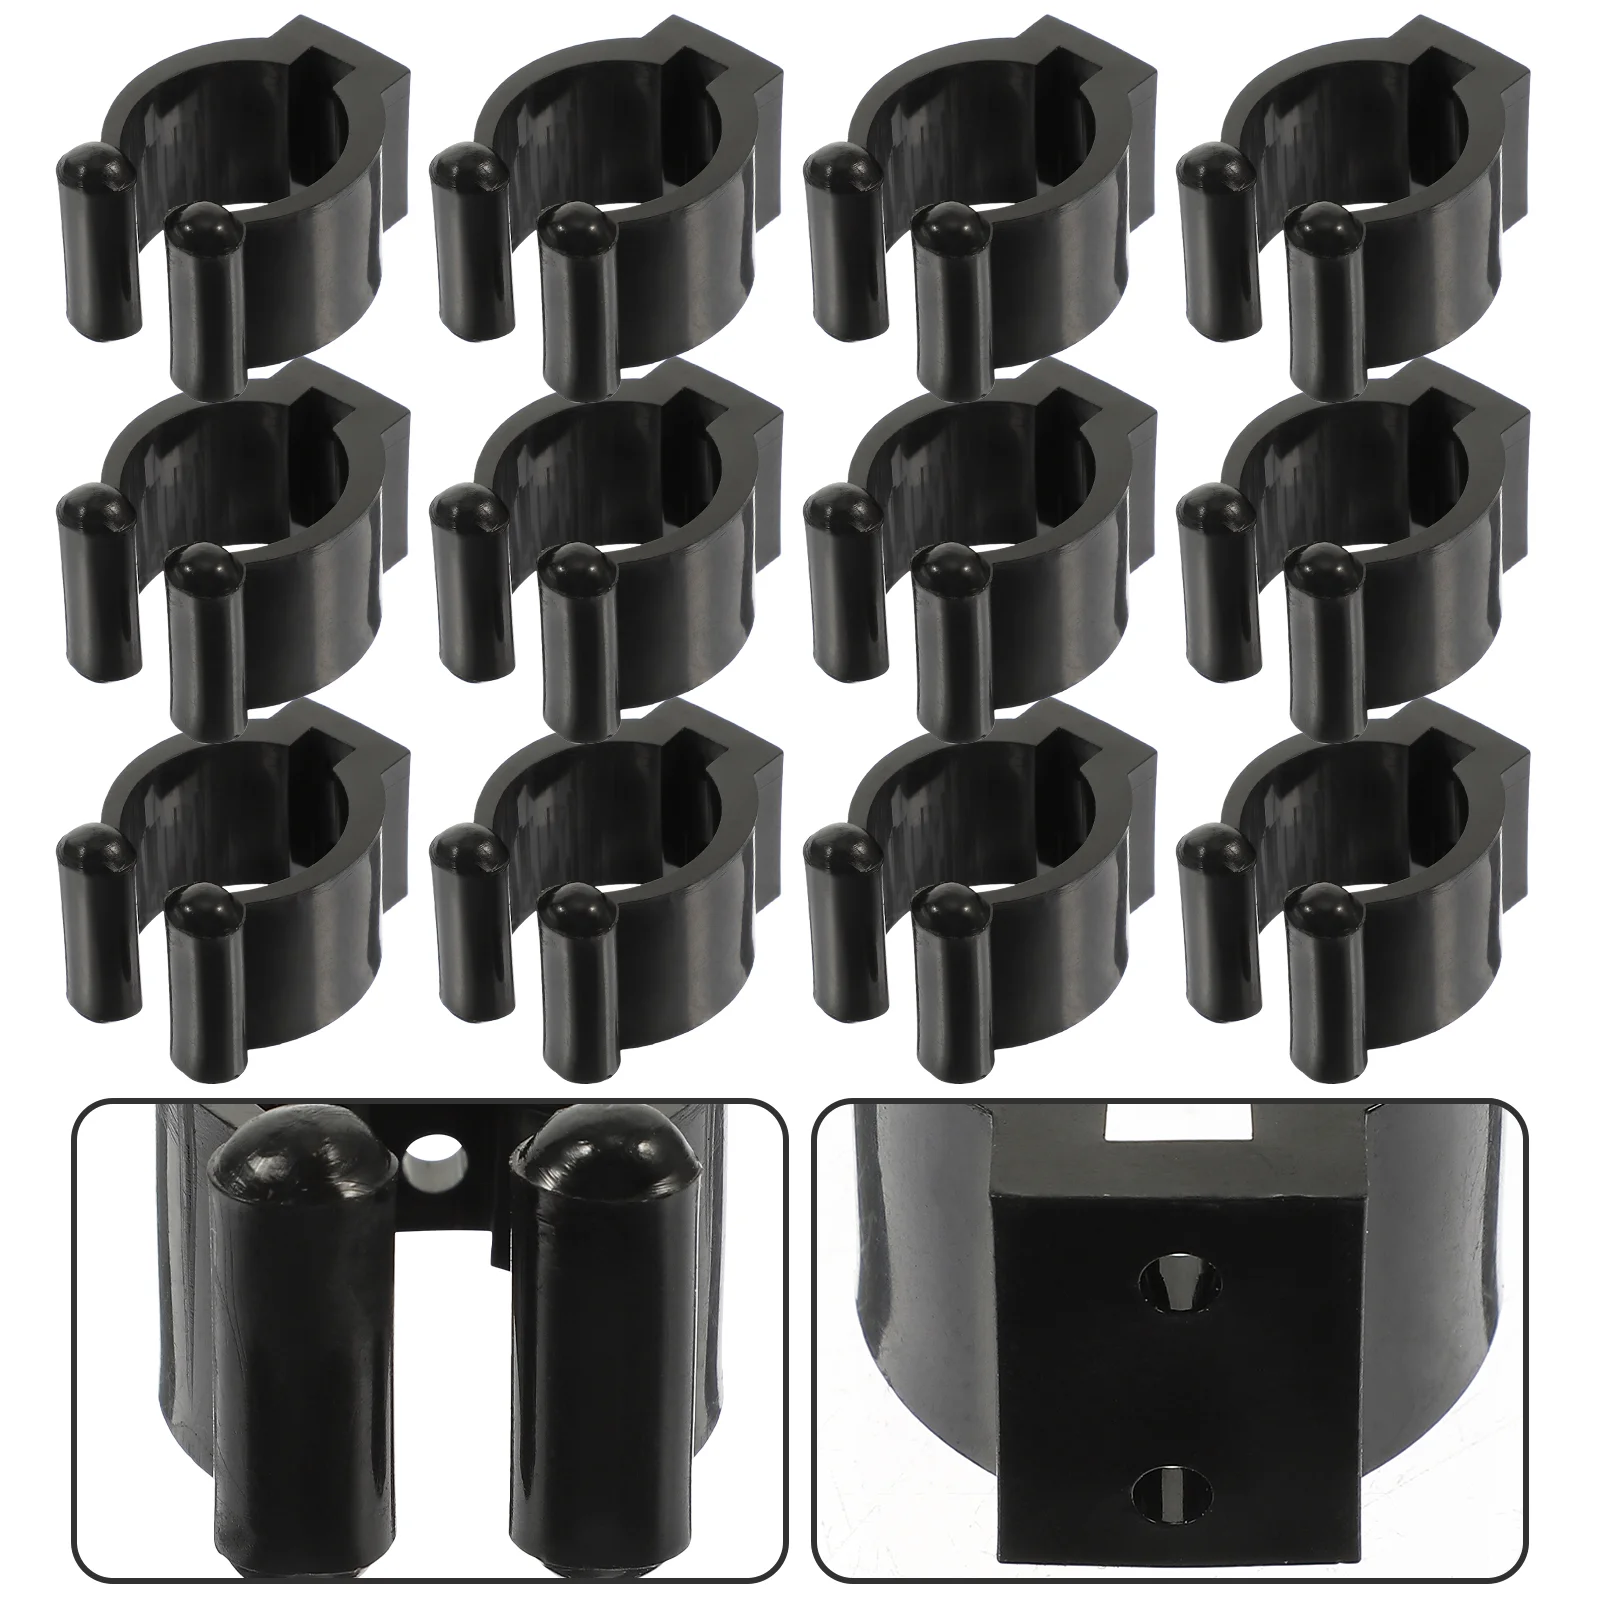 

12Pcs Fishing Tools Plastic Club Clips Fishing Rod Holders Pole Holding Racks for Outdoor